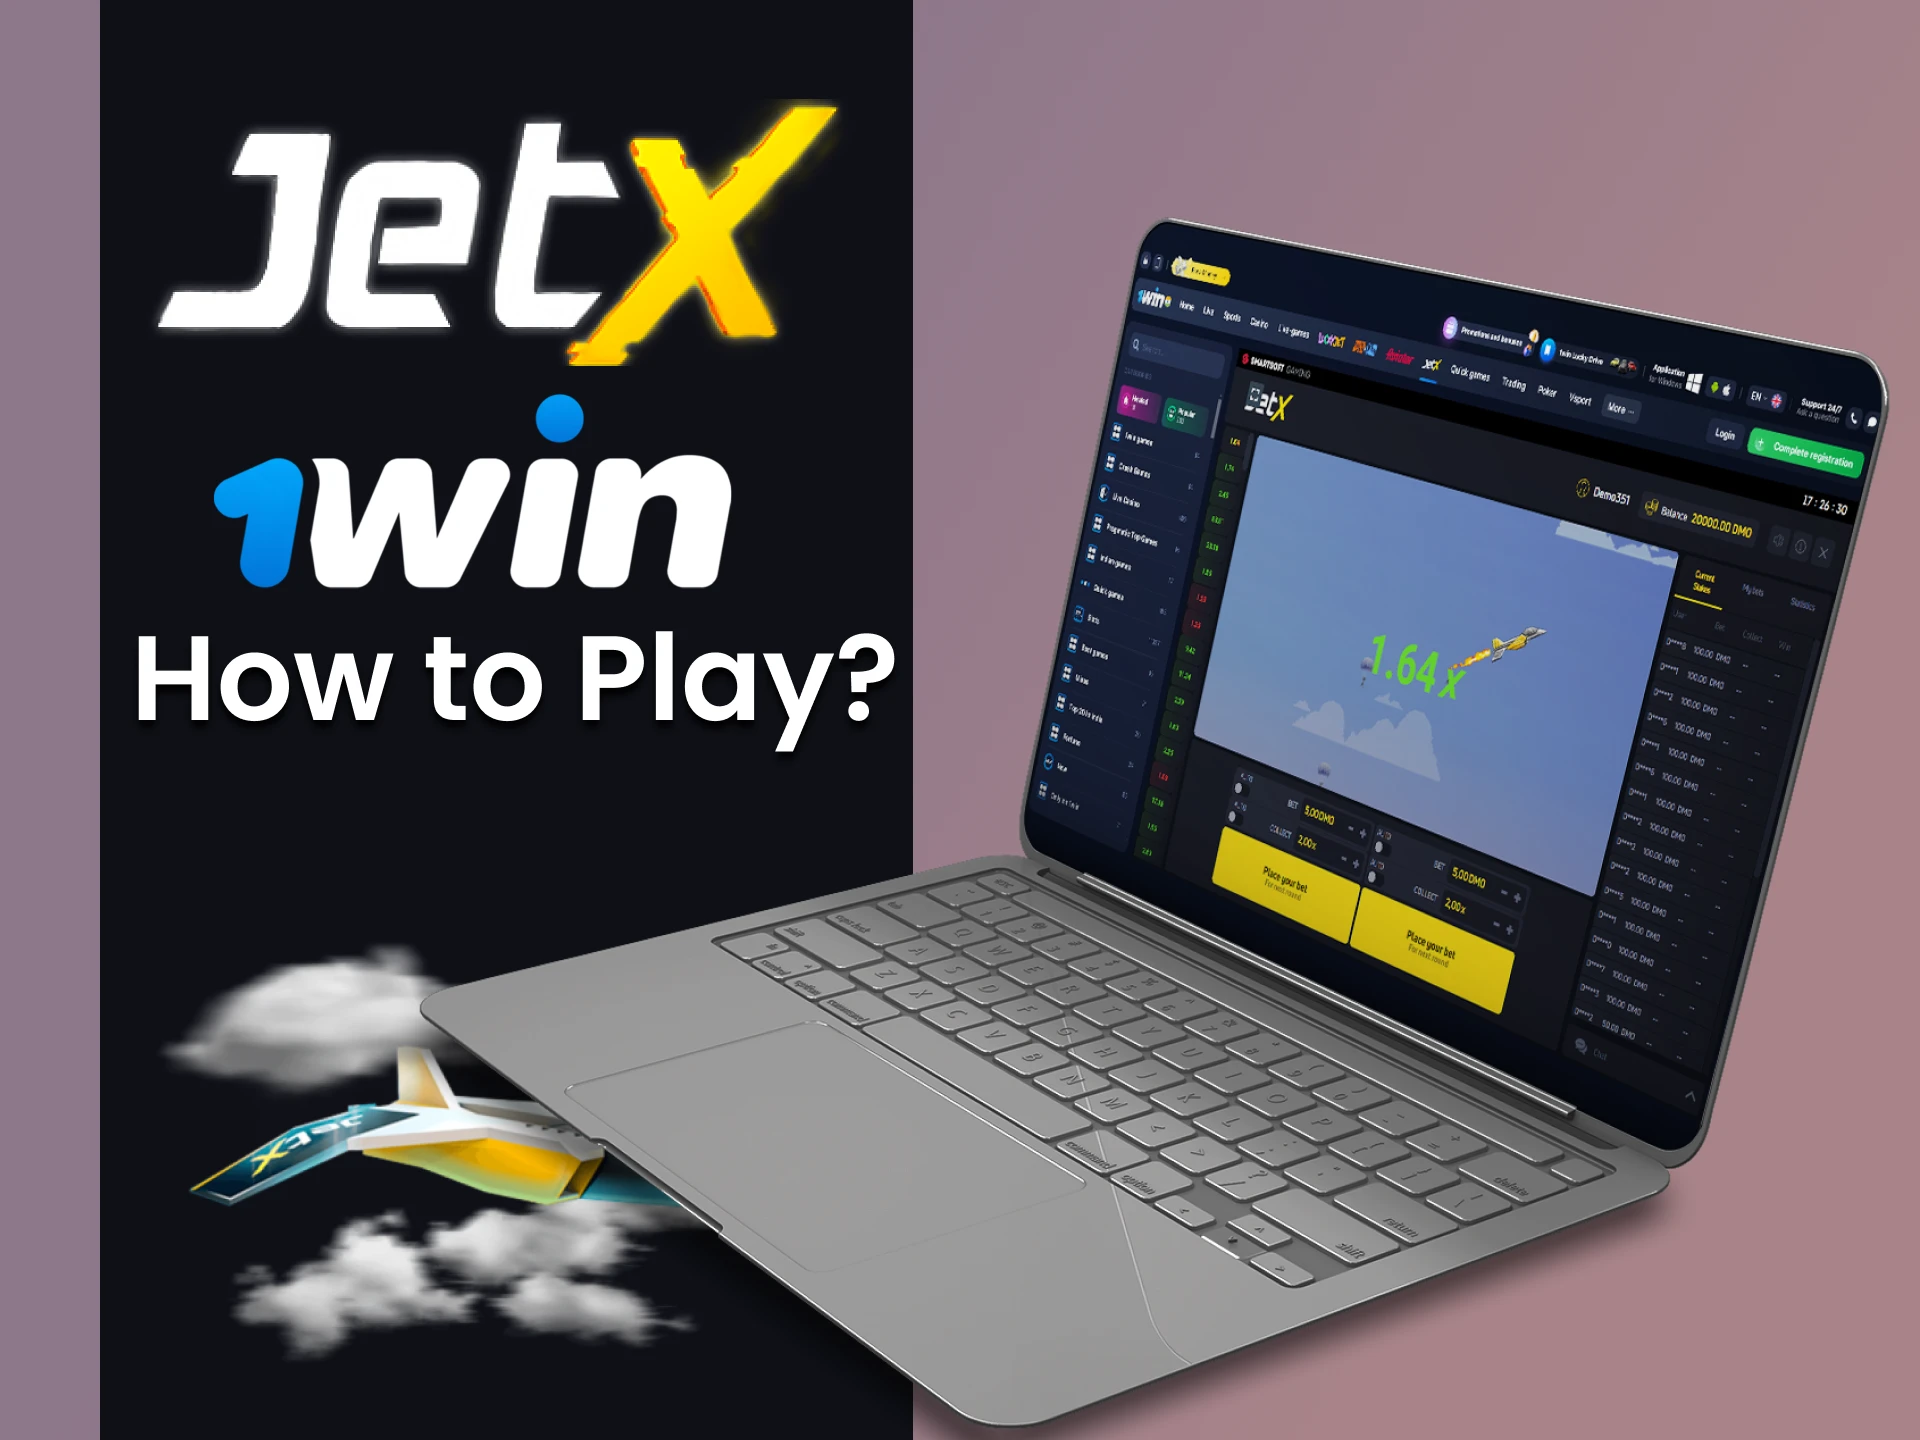 Go to the games section on 1win to play JetX.